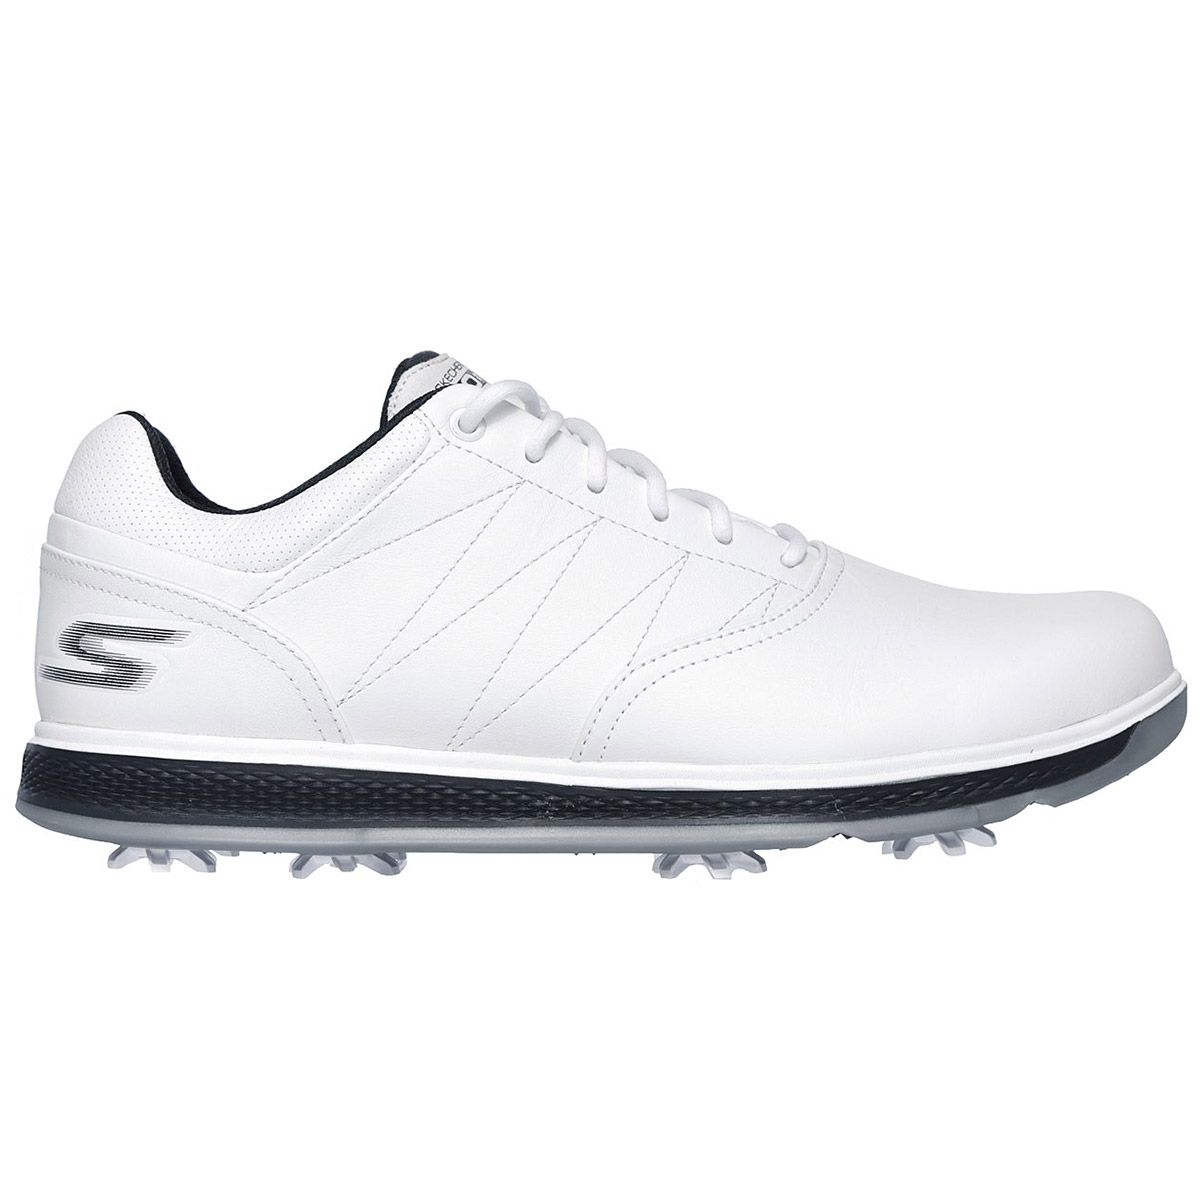 Skechers Go Golf Pro V3 Shoes from 